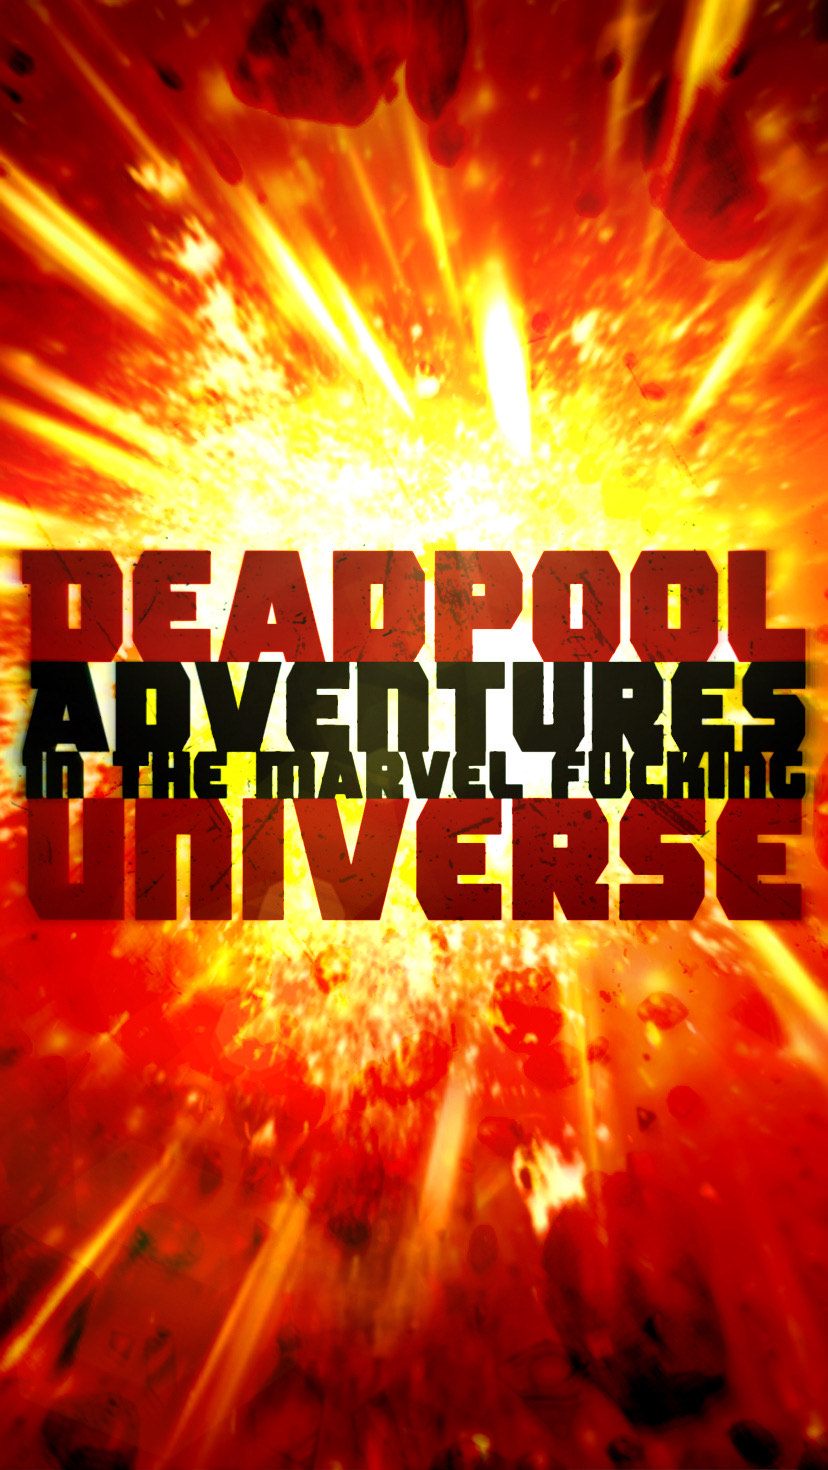 Deadpool Adventures in the Marvel F****** Universe